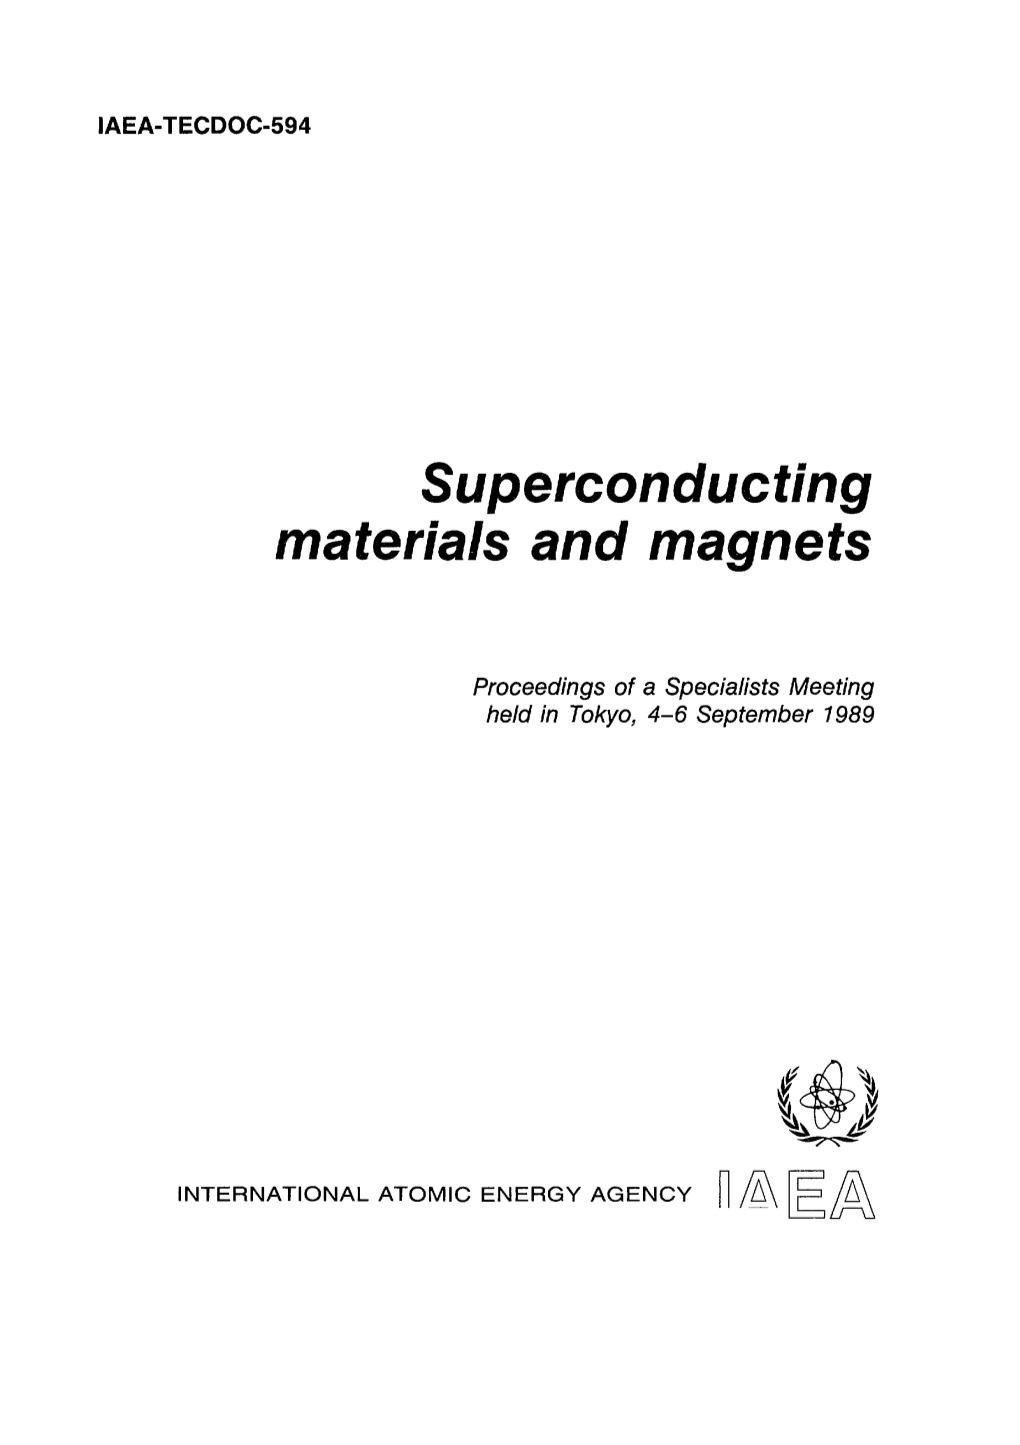 Superconducting Materials and Magnets